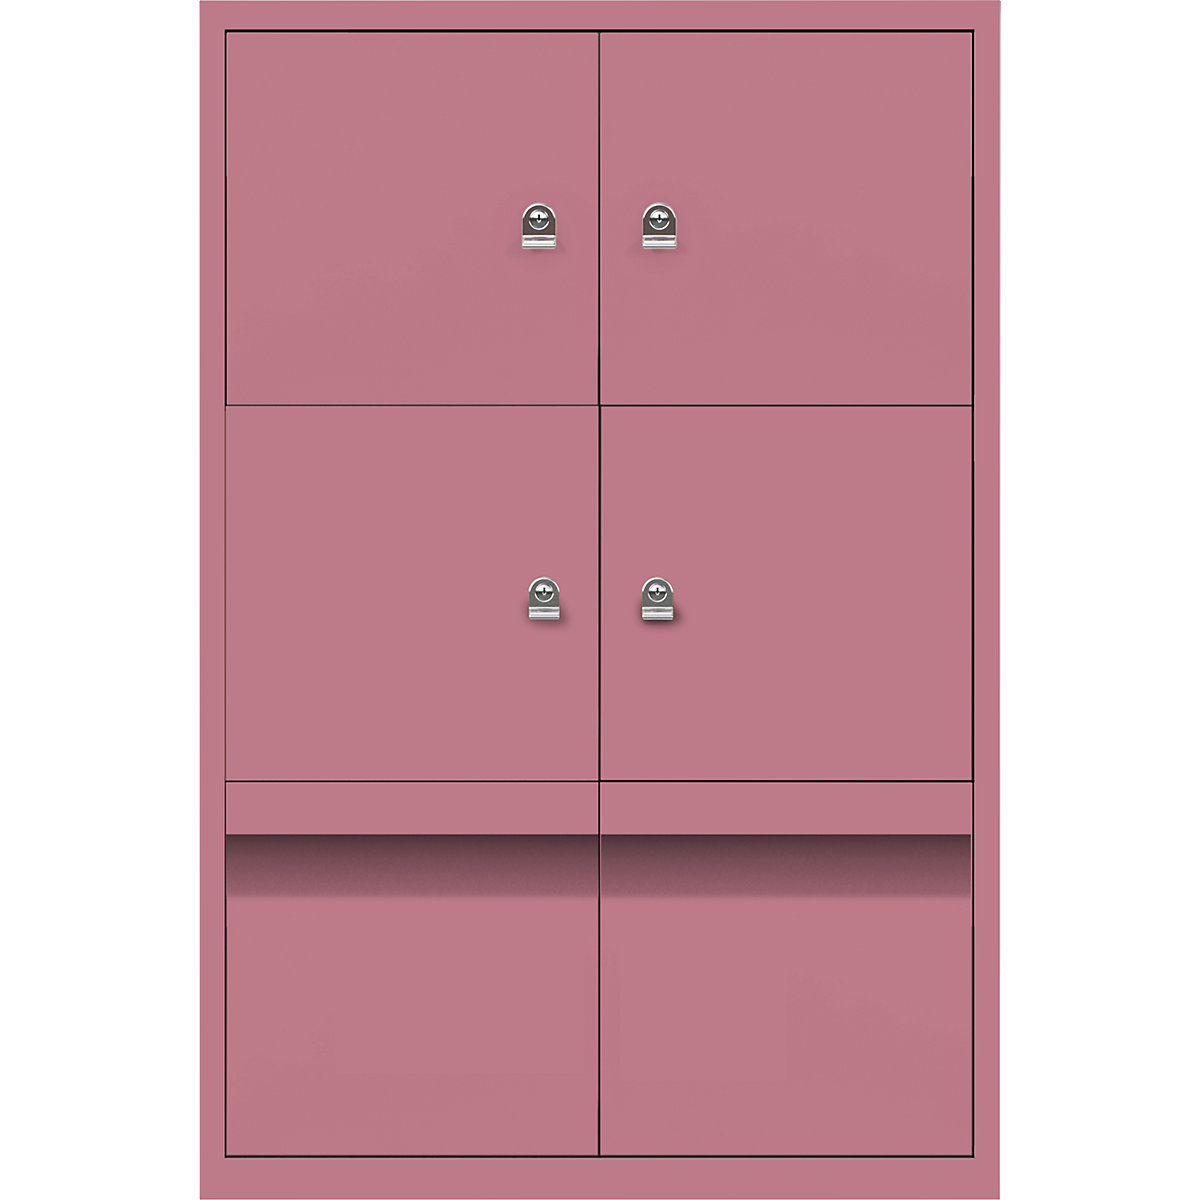 LateralFile™ lodge – BISLEY, with 4 lockable compartments and 2 drawers, height 375 mm each, pink-20